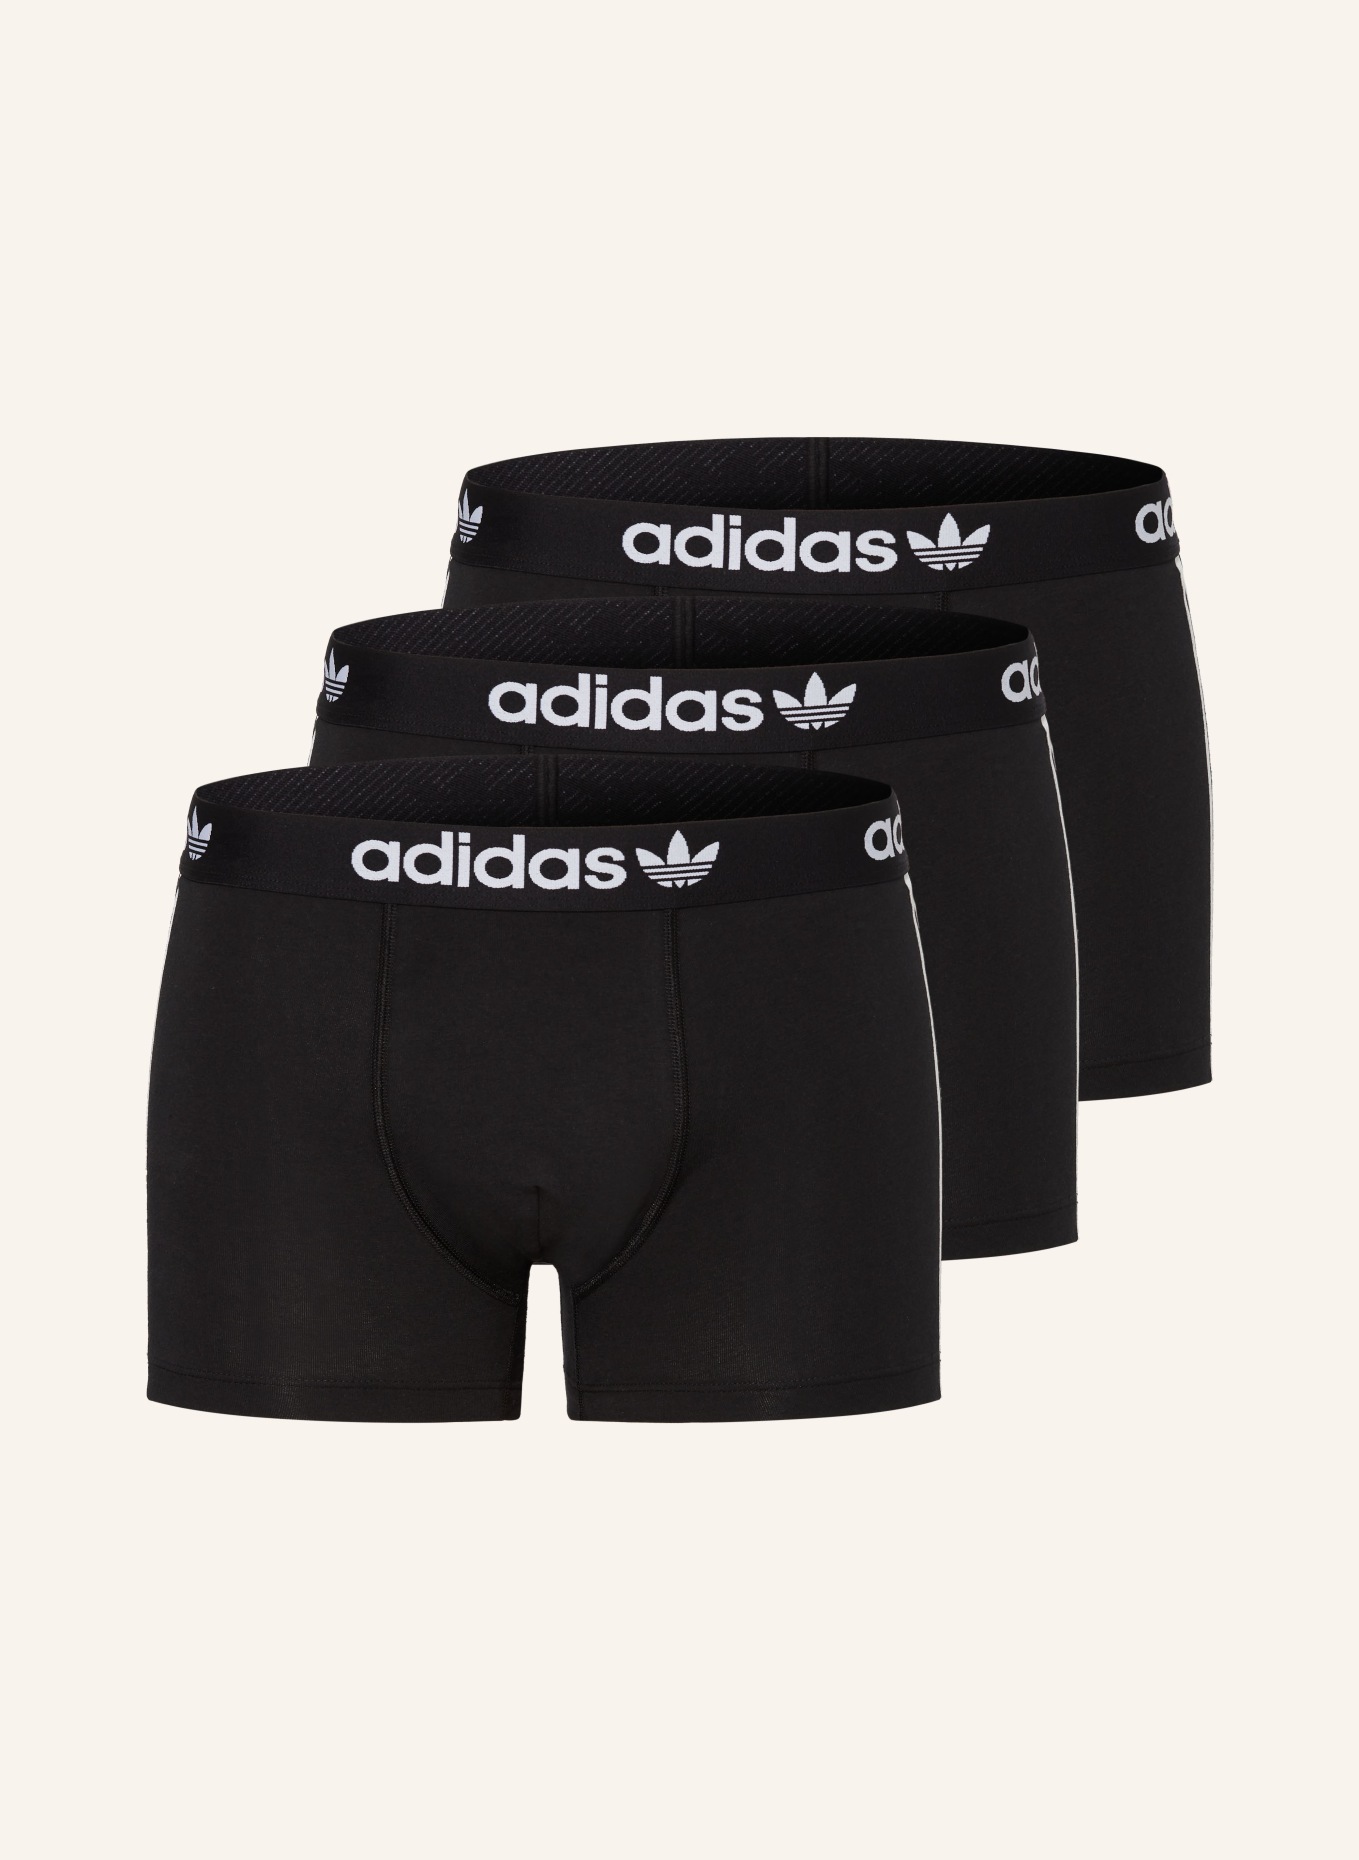 Buy adidas Mens Active 3-Stripes Cotton Three Pack Trunks Black